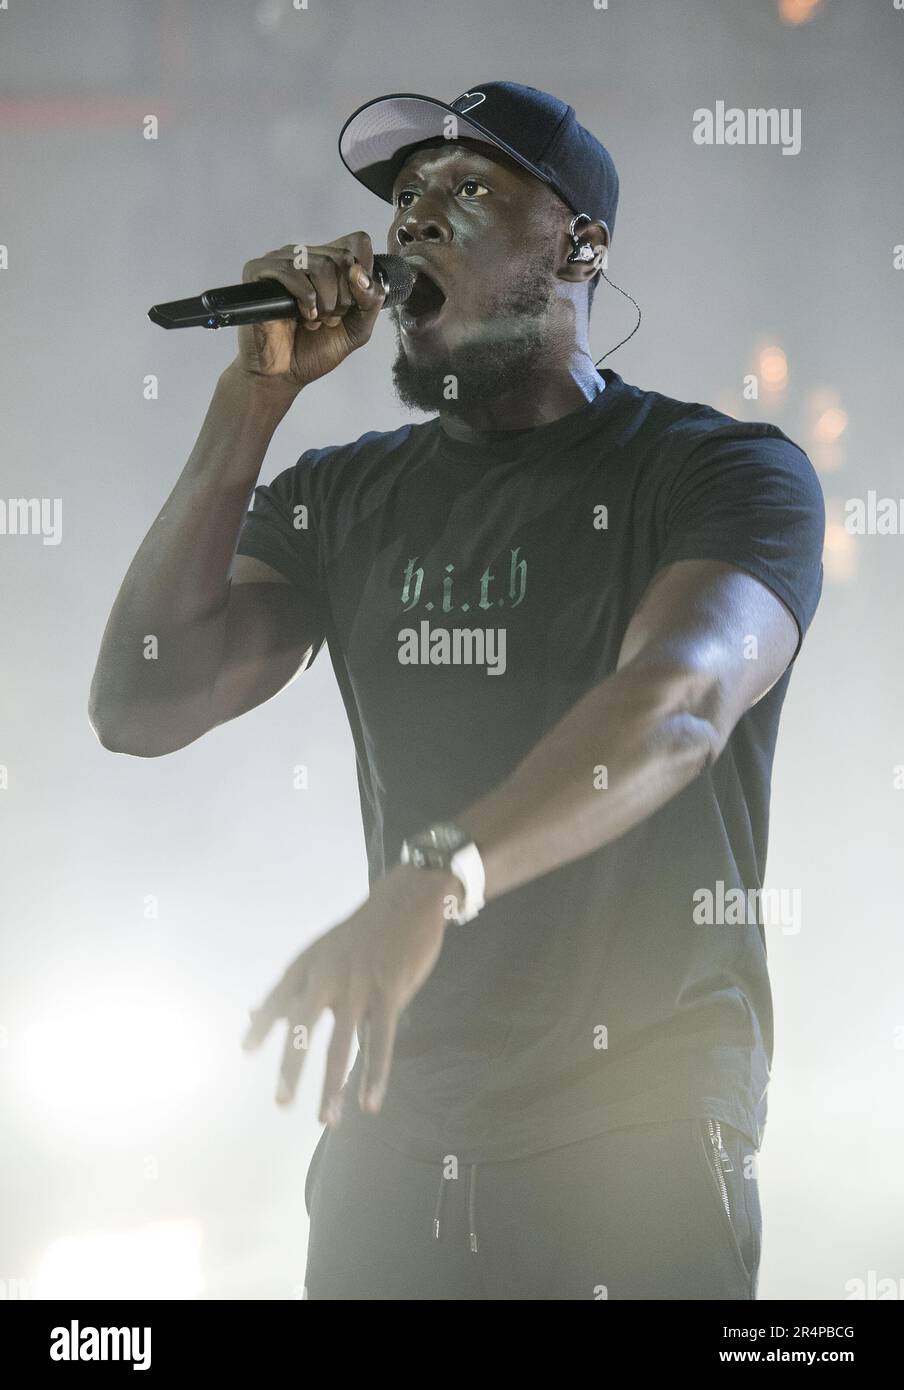 Stormzy: 'The greatest music on Earth is coming out of Africa